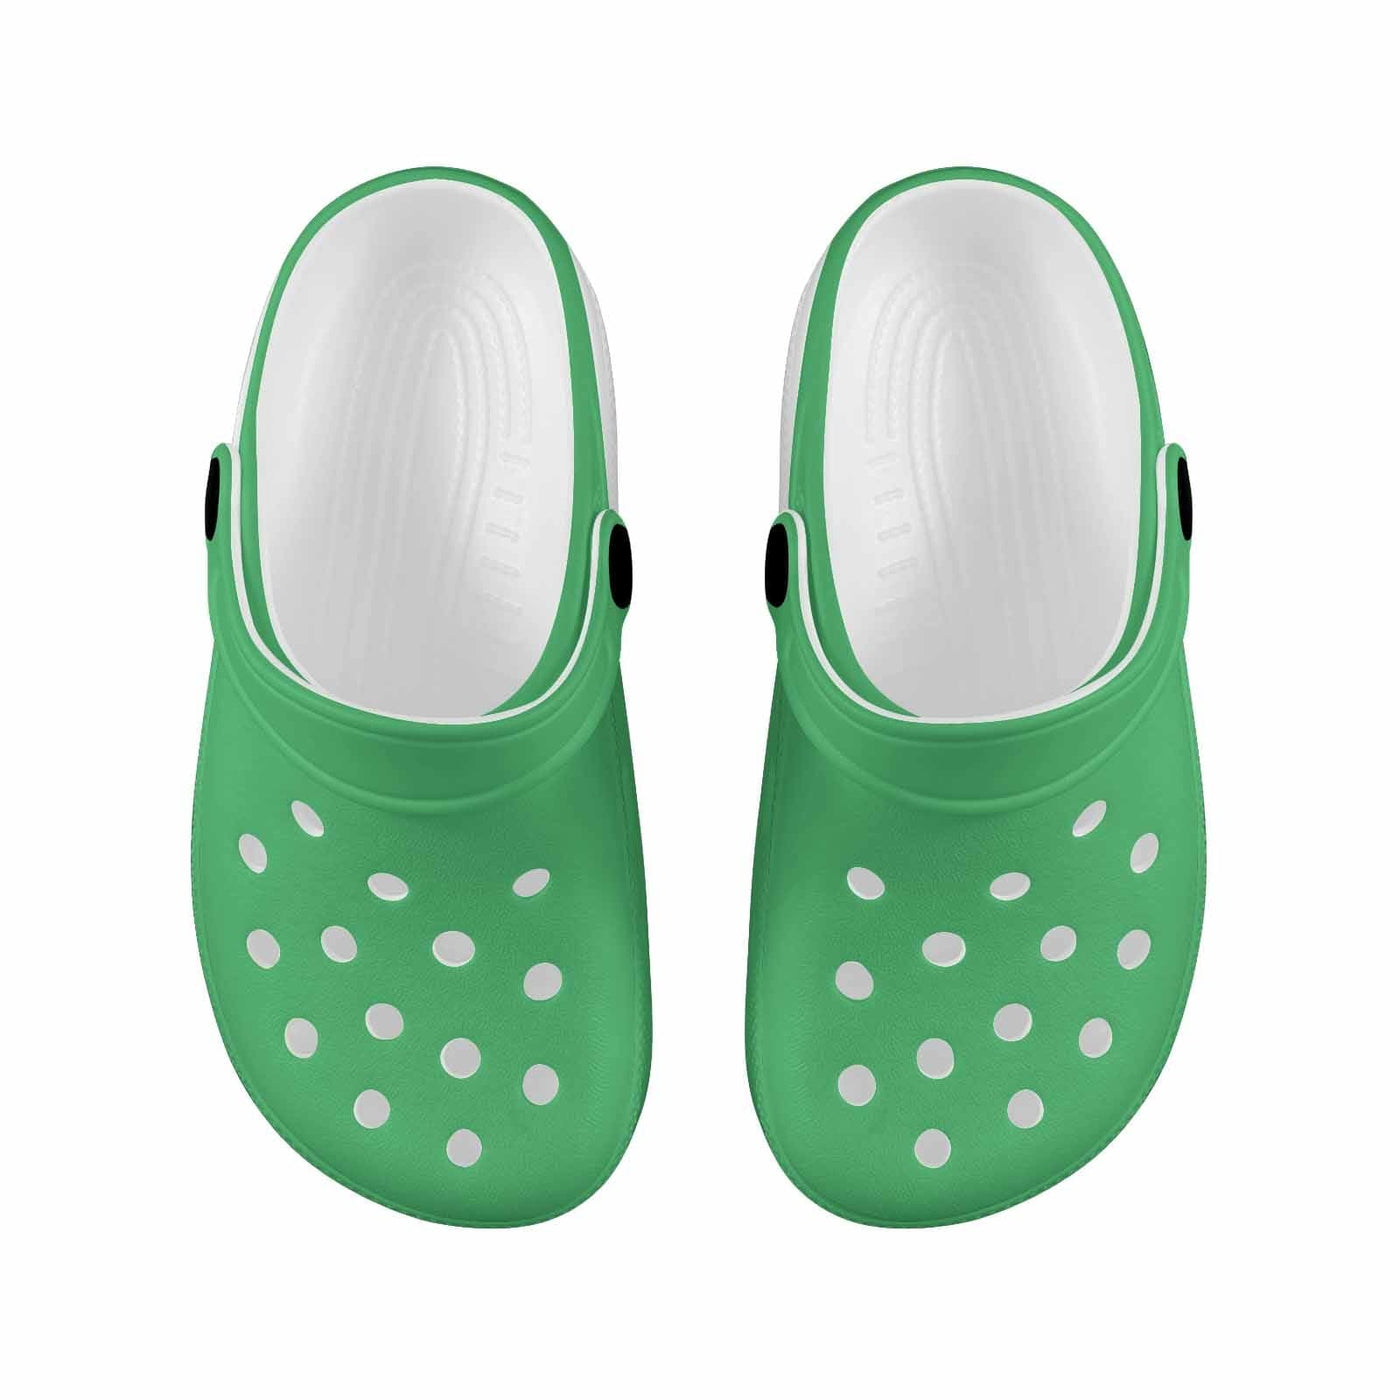 Emerald Green Clogs For Youth - Unisex | Clogs | Youth